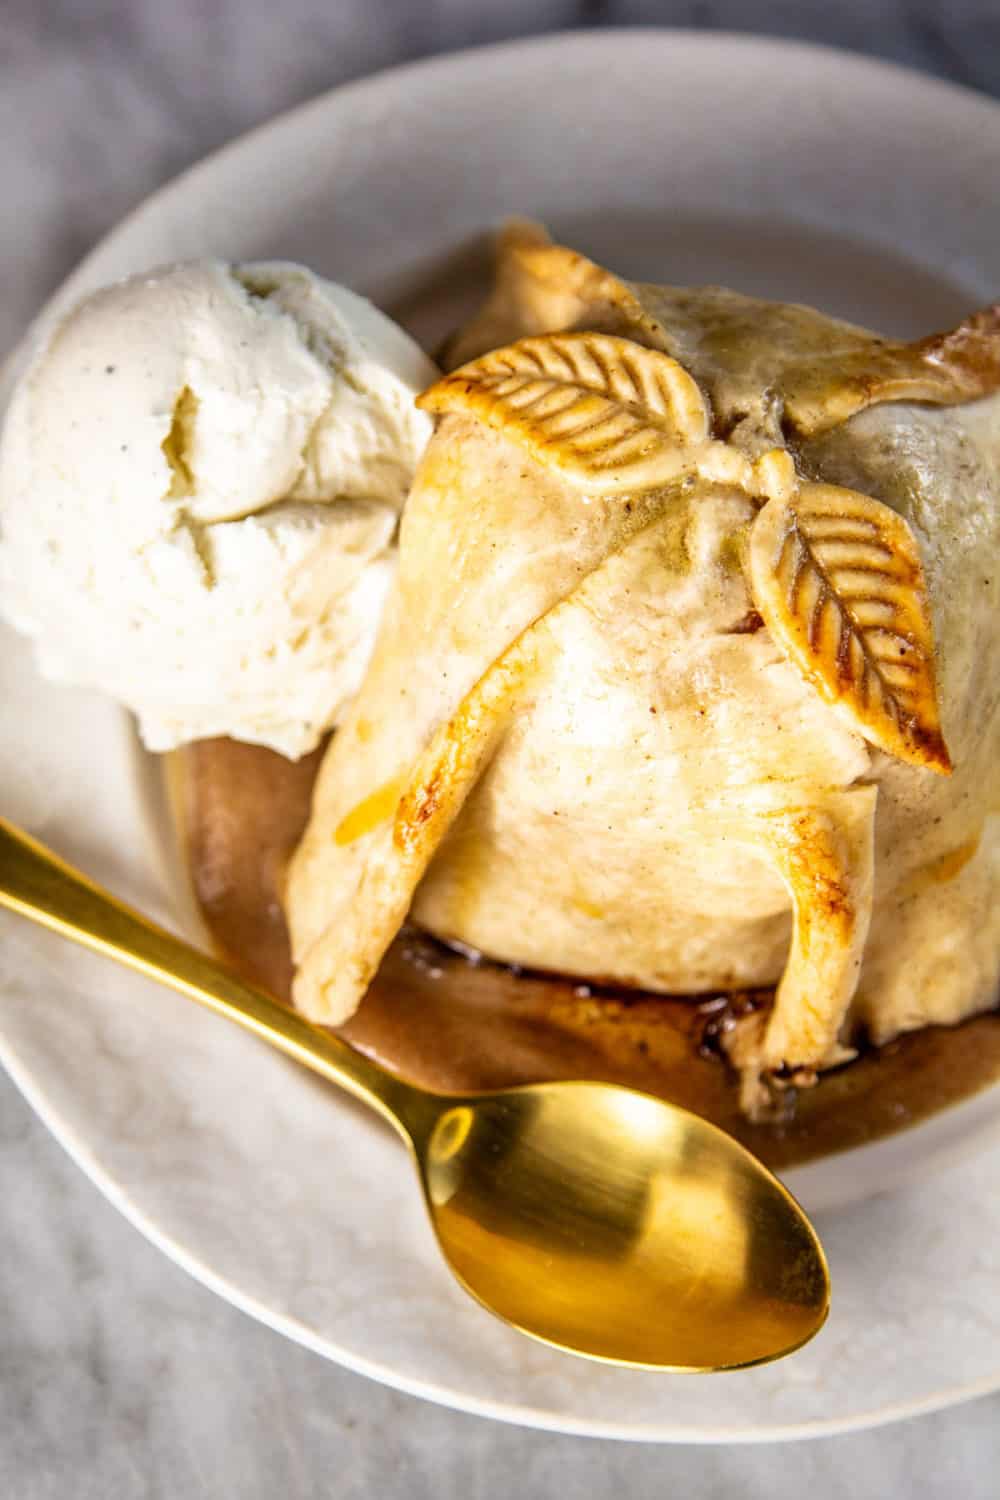 An apple dumpling with a scoop of ice cream.